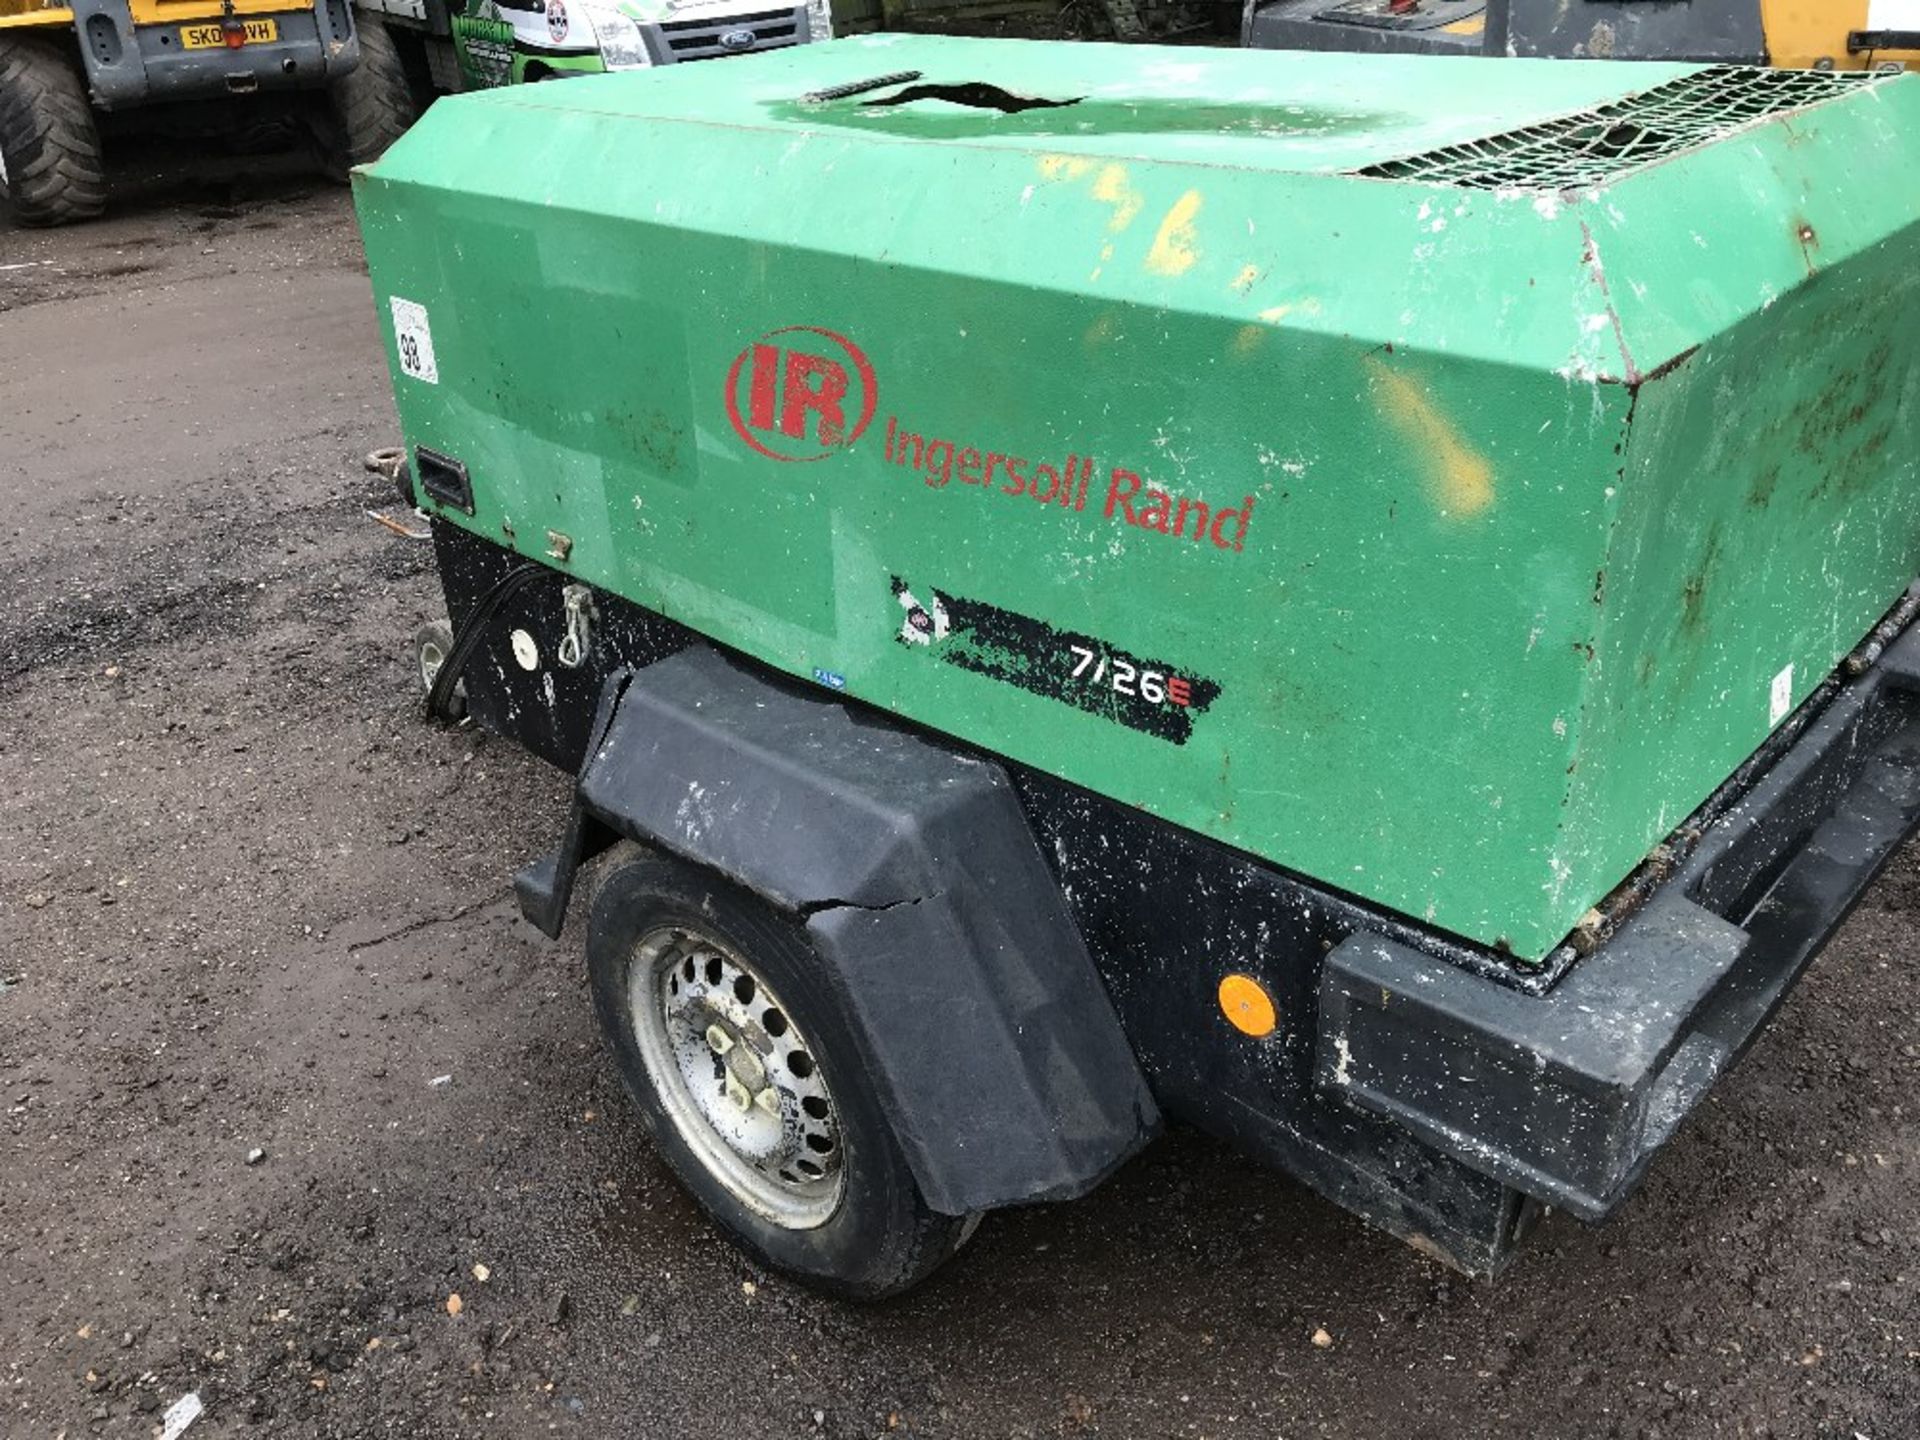 Ingersoll Rand 726 compressor, yr2006 PN:2090FC SN:SCZ726EFX6Y107234 when tested was seen to run and